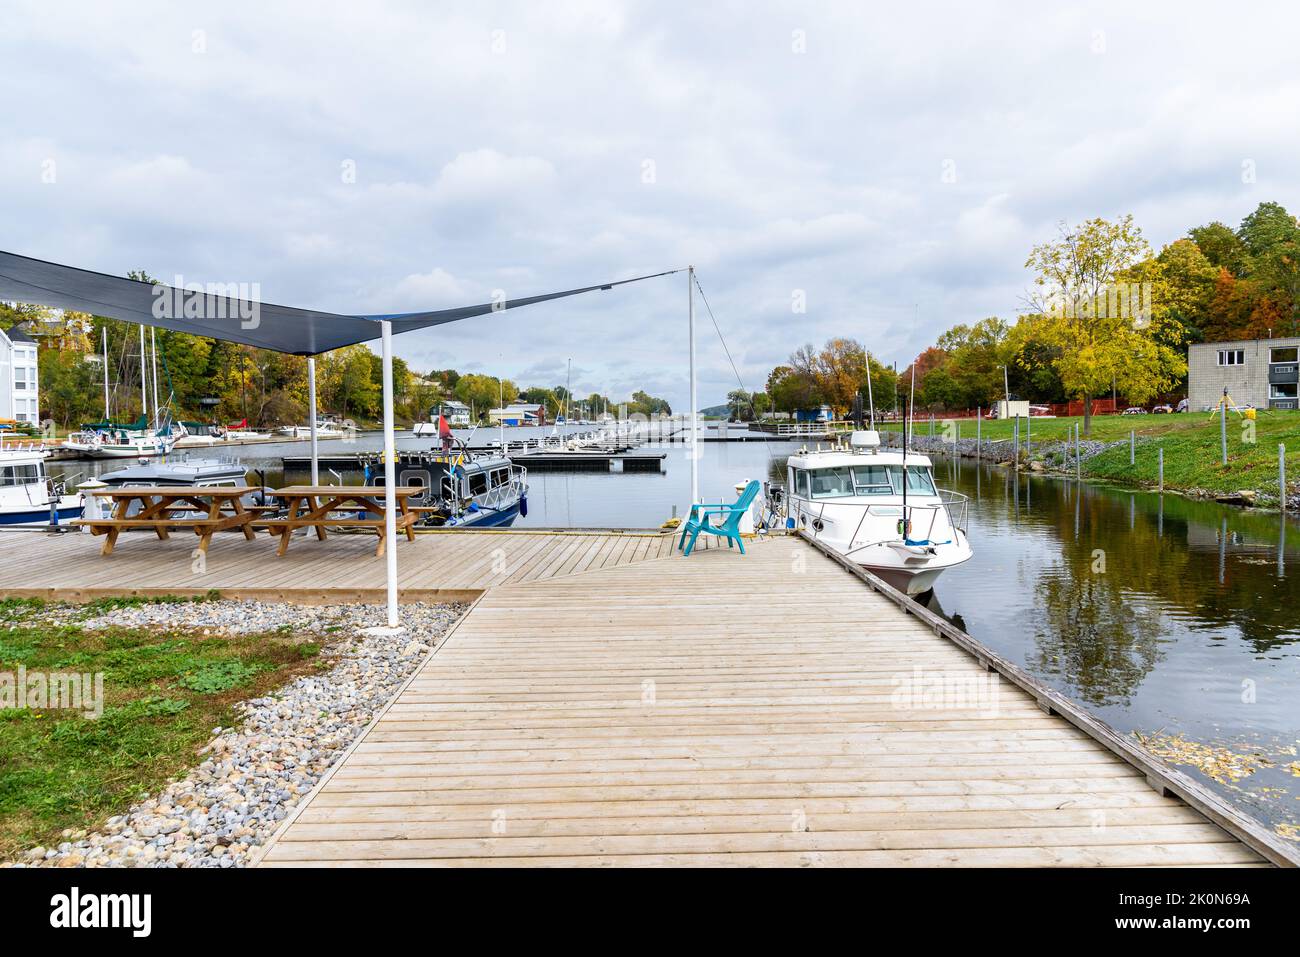 View of a deserted marina on a lake on a cloudy autumn day. Picton, On, Canada. Stock Photo